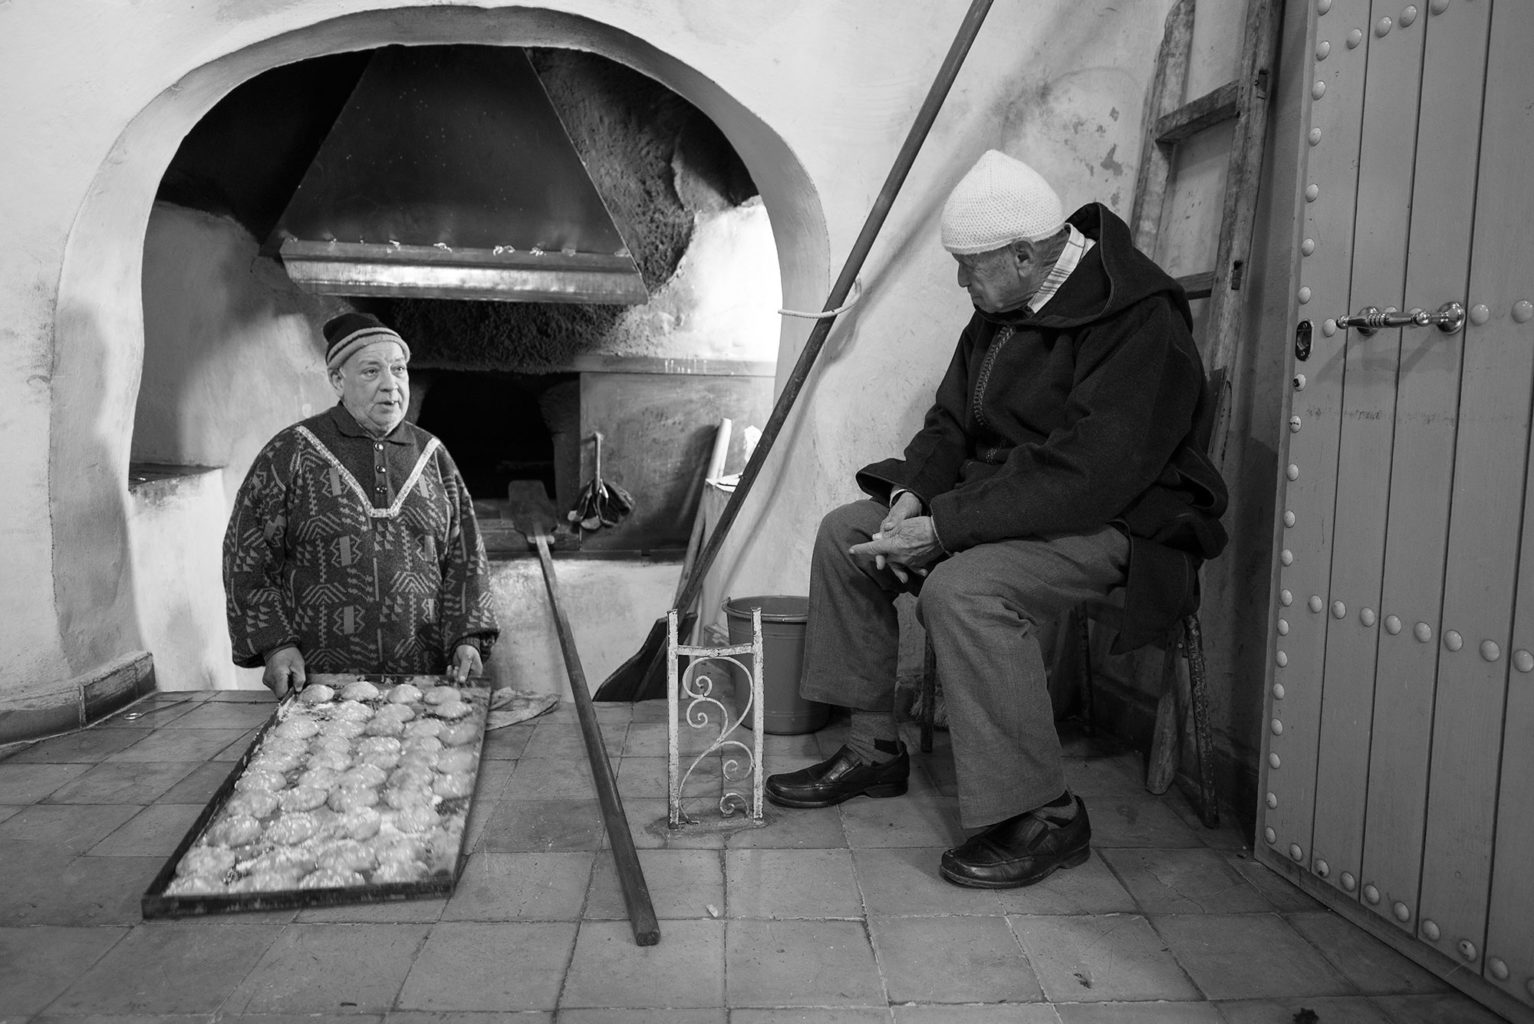 Bakery at Blue City Northern Morocco